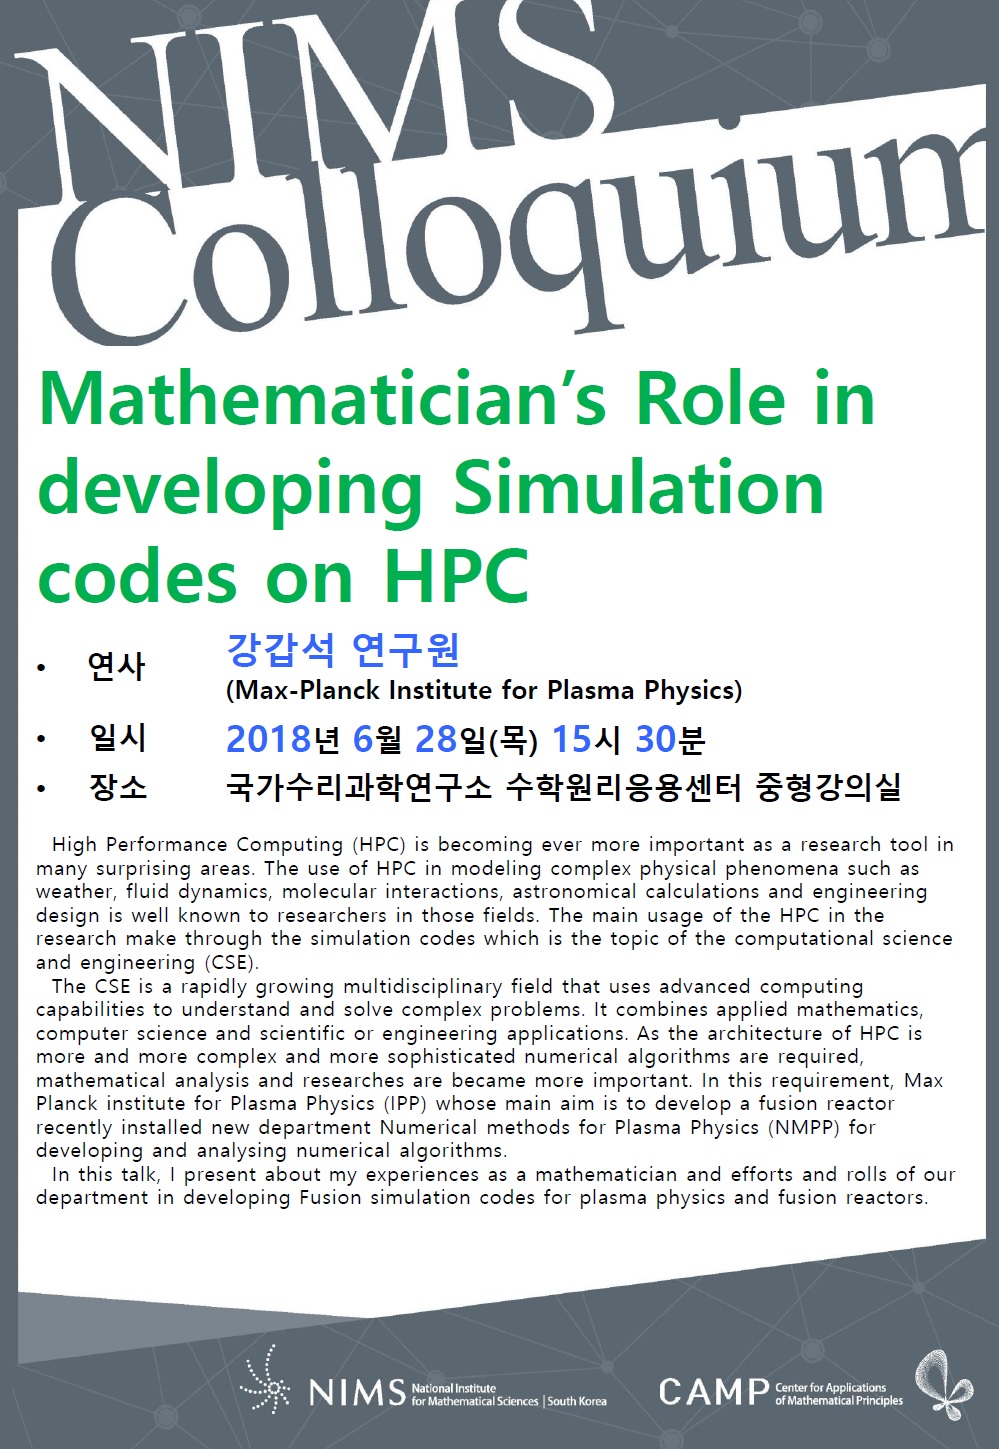 NIMS Colloquium <Mathematician’s Role in developing Simulation codes on HPC>